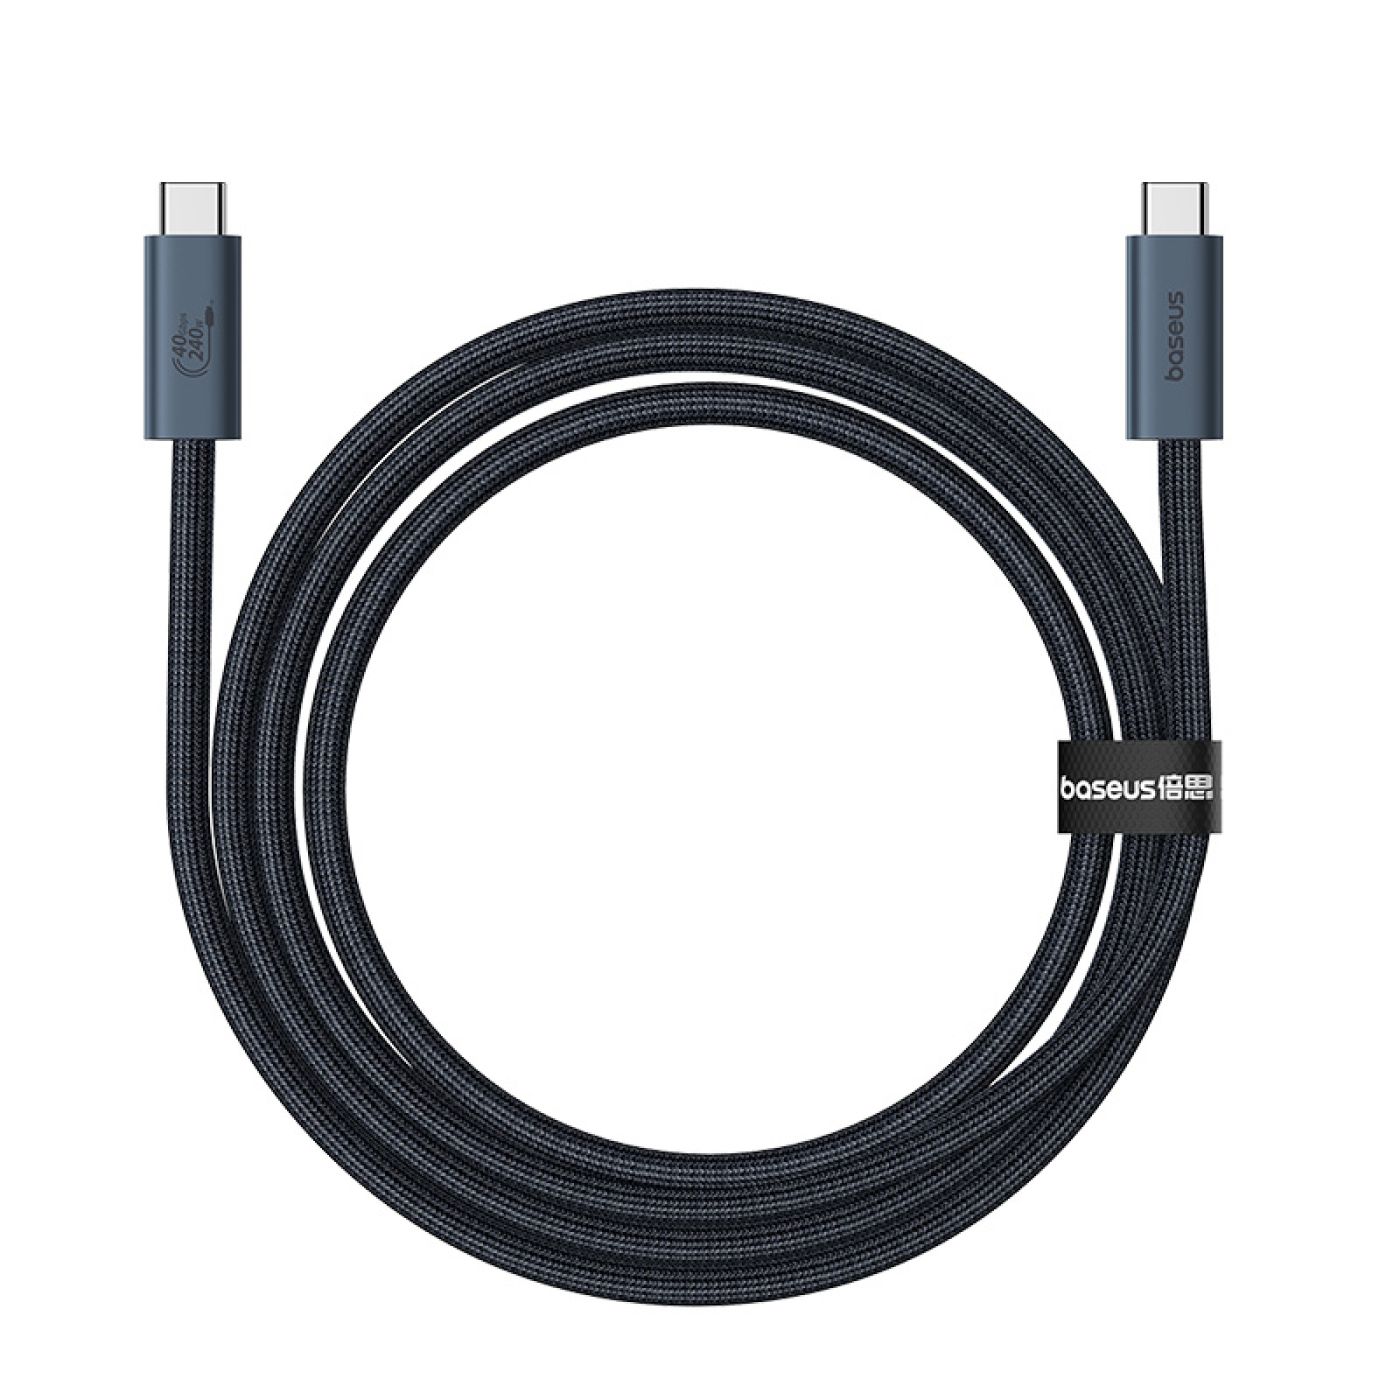 Cáp Sạc Nhanh Truyền Dữ Liệu Baseus Flash Series 2 USB4 Full Featured Data Cable Type-C to Type-C 24